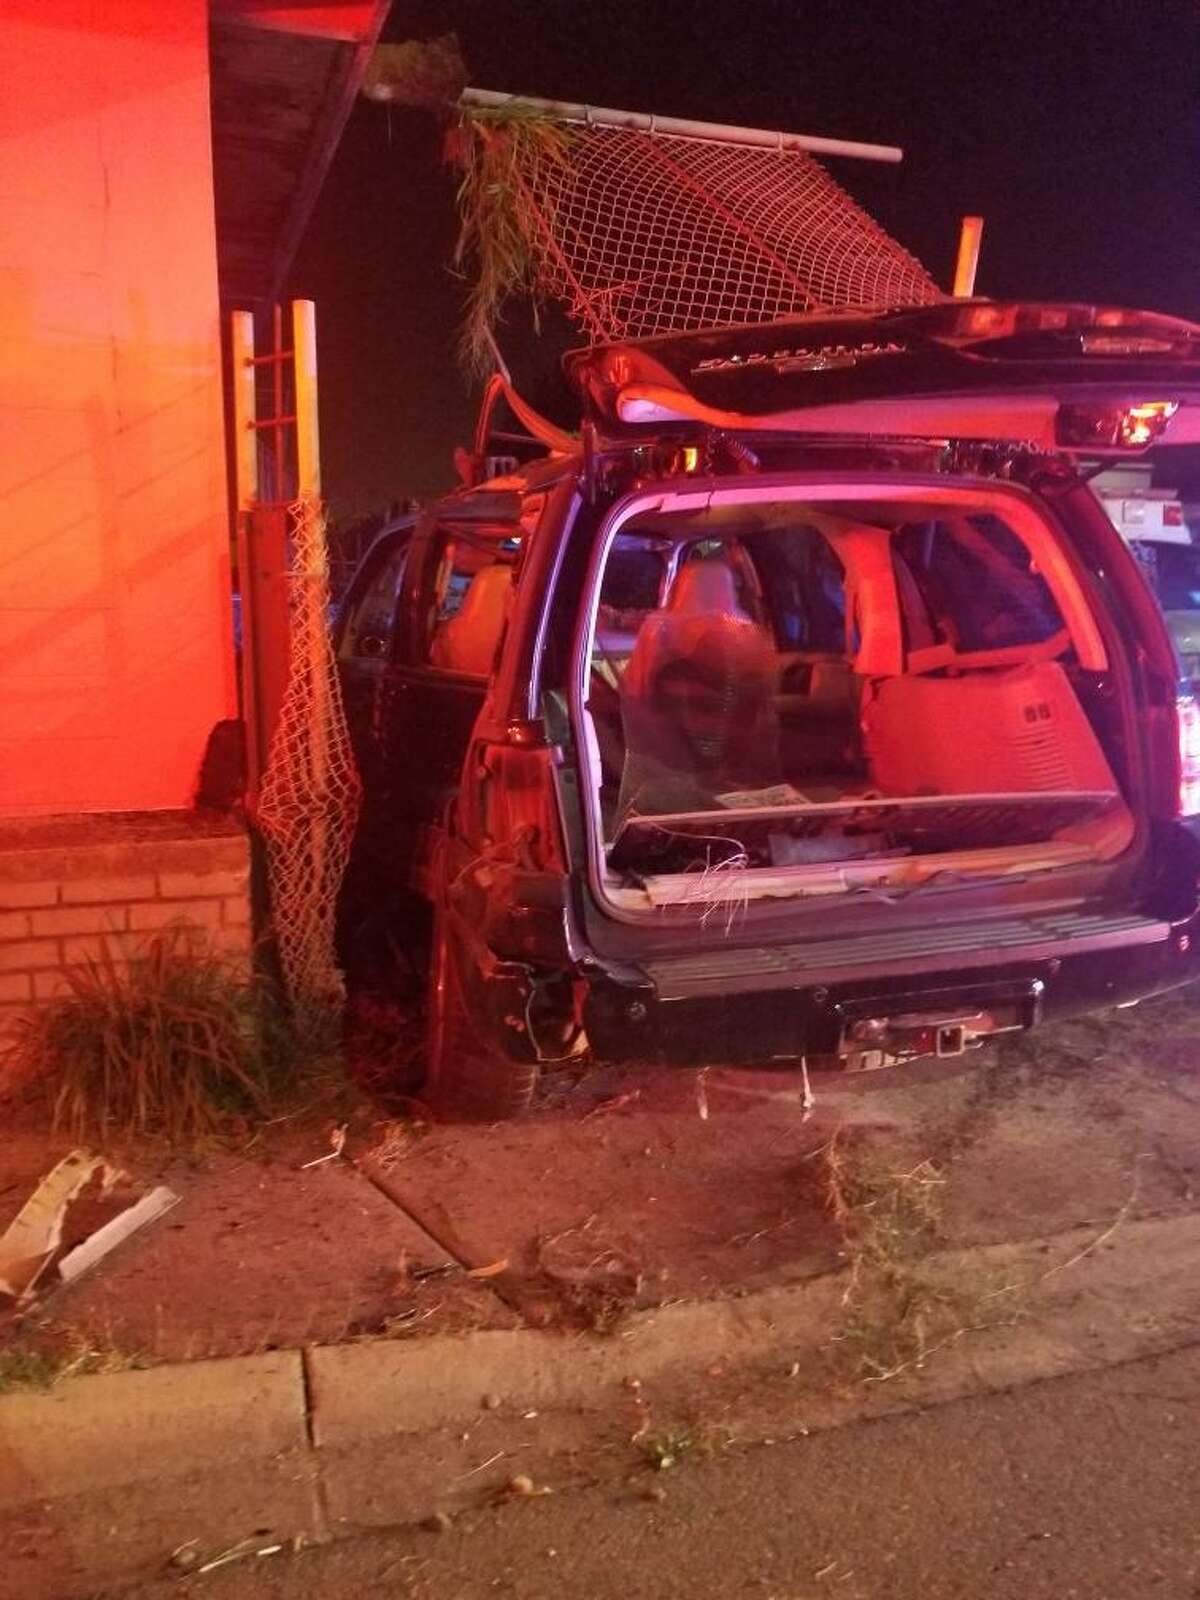 According to the Laredo Fire Department, a vehicle drove into a building on early Saturday morning.